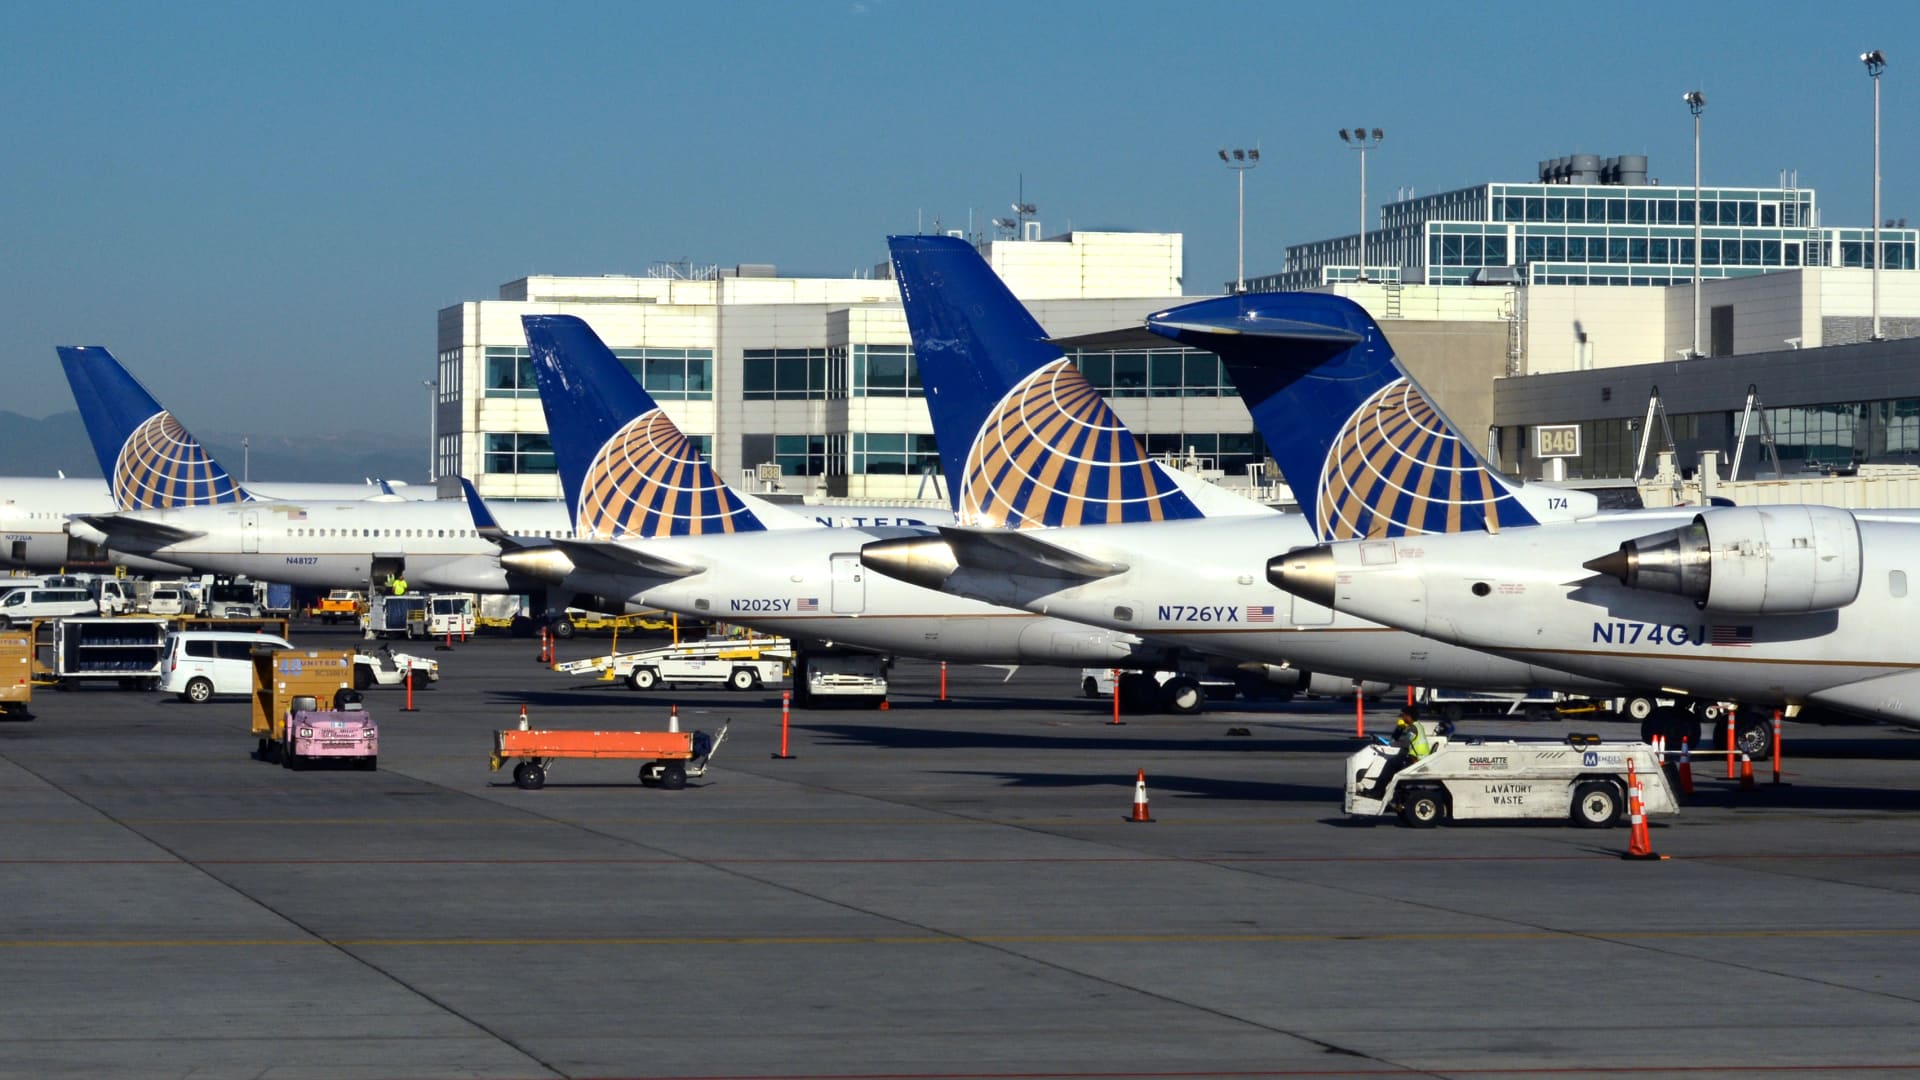 United warns 36,000 employees of potential job cuts as pandemic roils travel demand